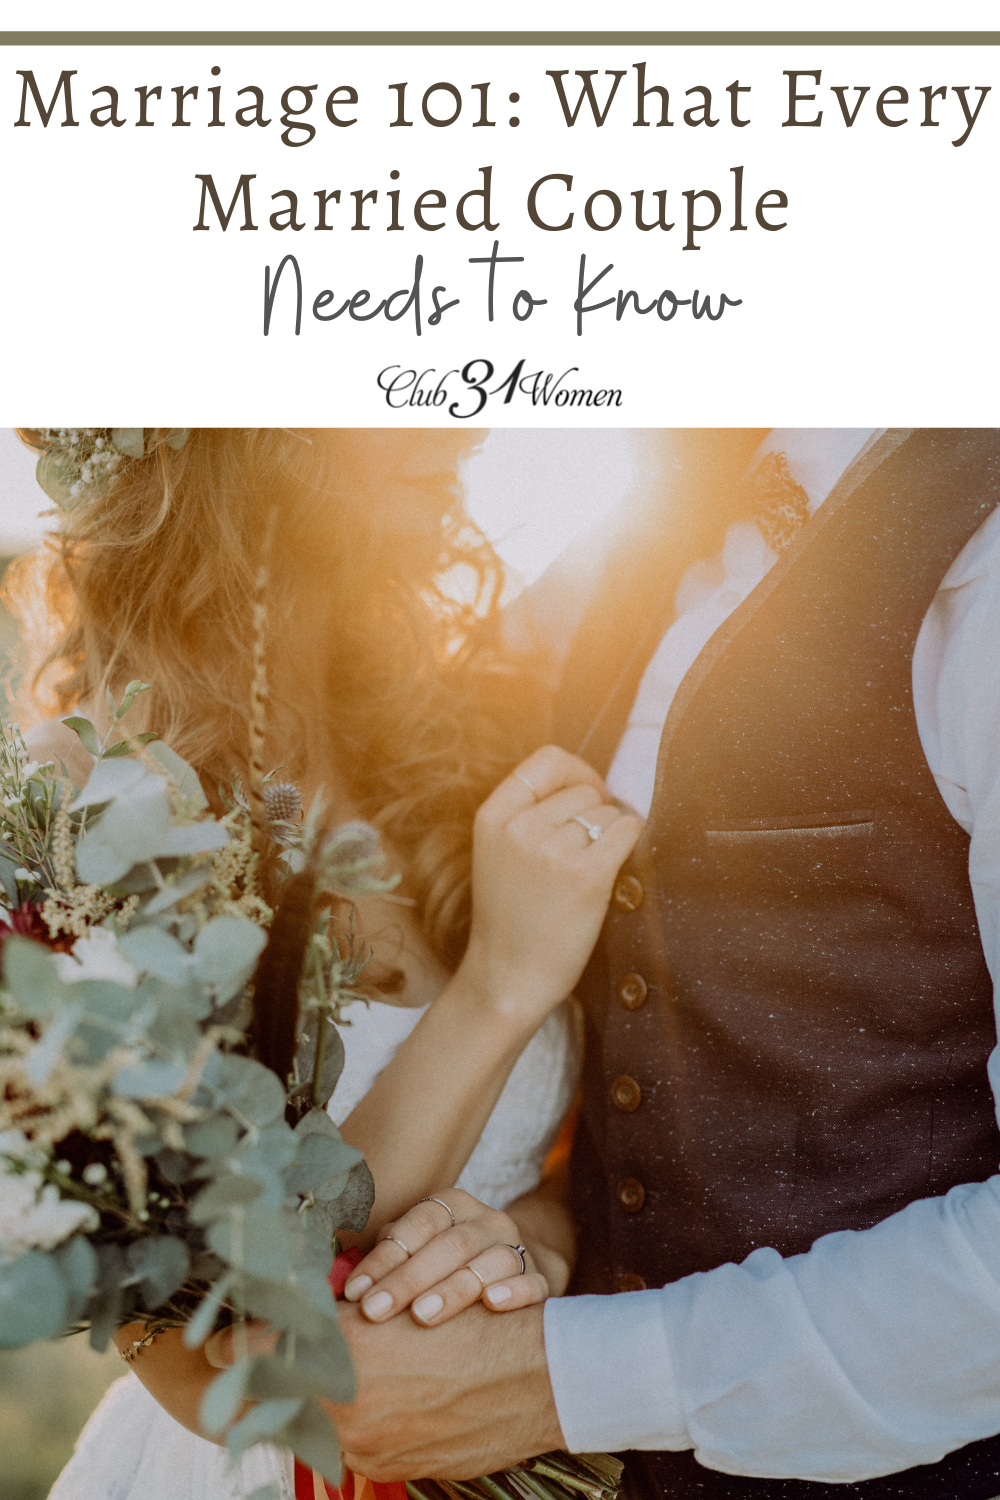 They might not have covered this in your premarital counseling - but they probably should have! Here's what you should really know about love and marriage! via @Club31Women